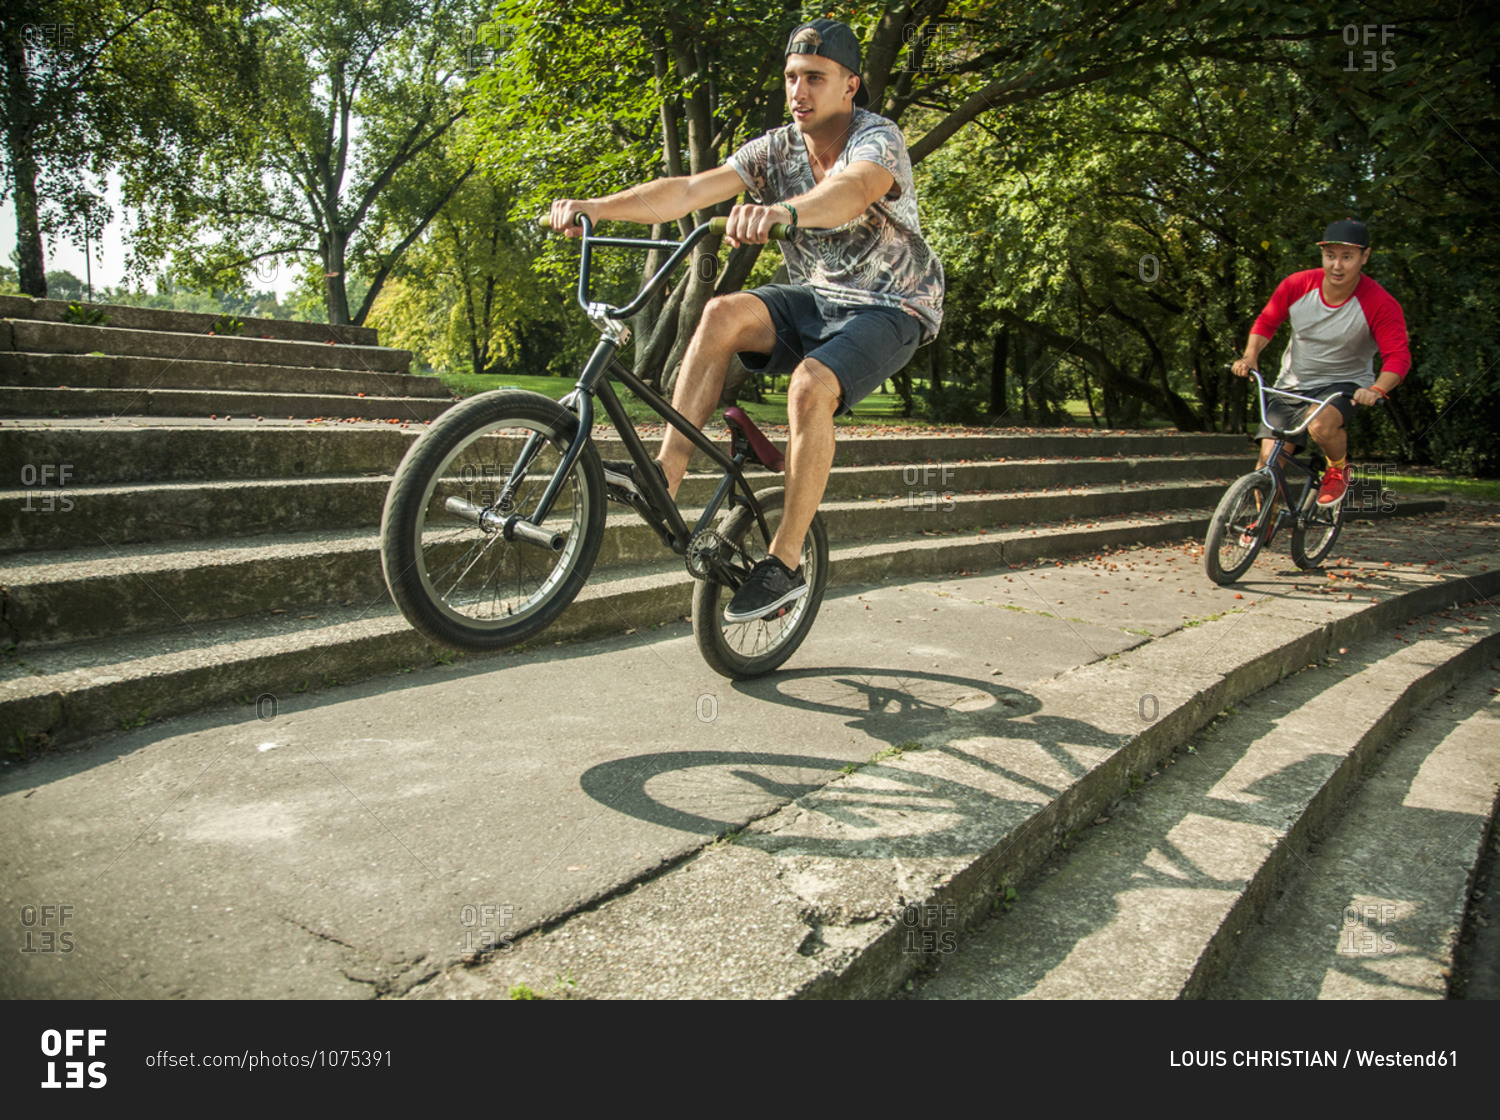 Young man doing wheelie stunt with BMX bicycle against friend cycling on steps at public park